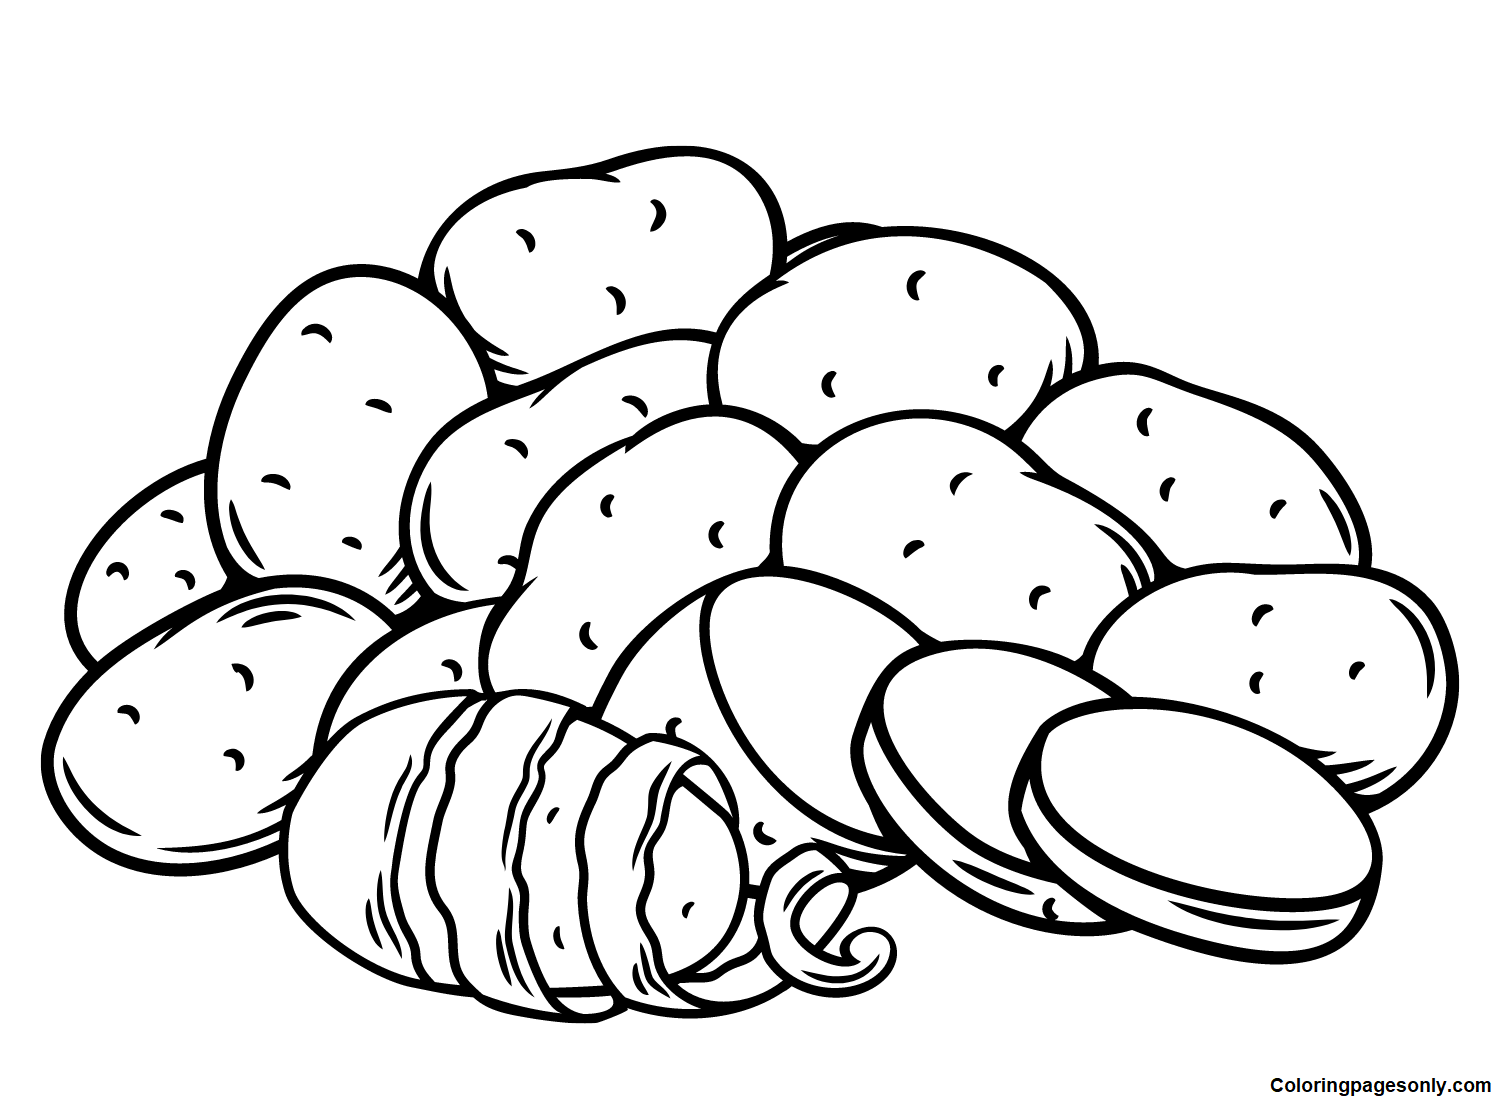 Vegetable Potatoes Coloring Page